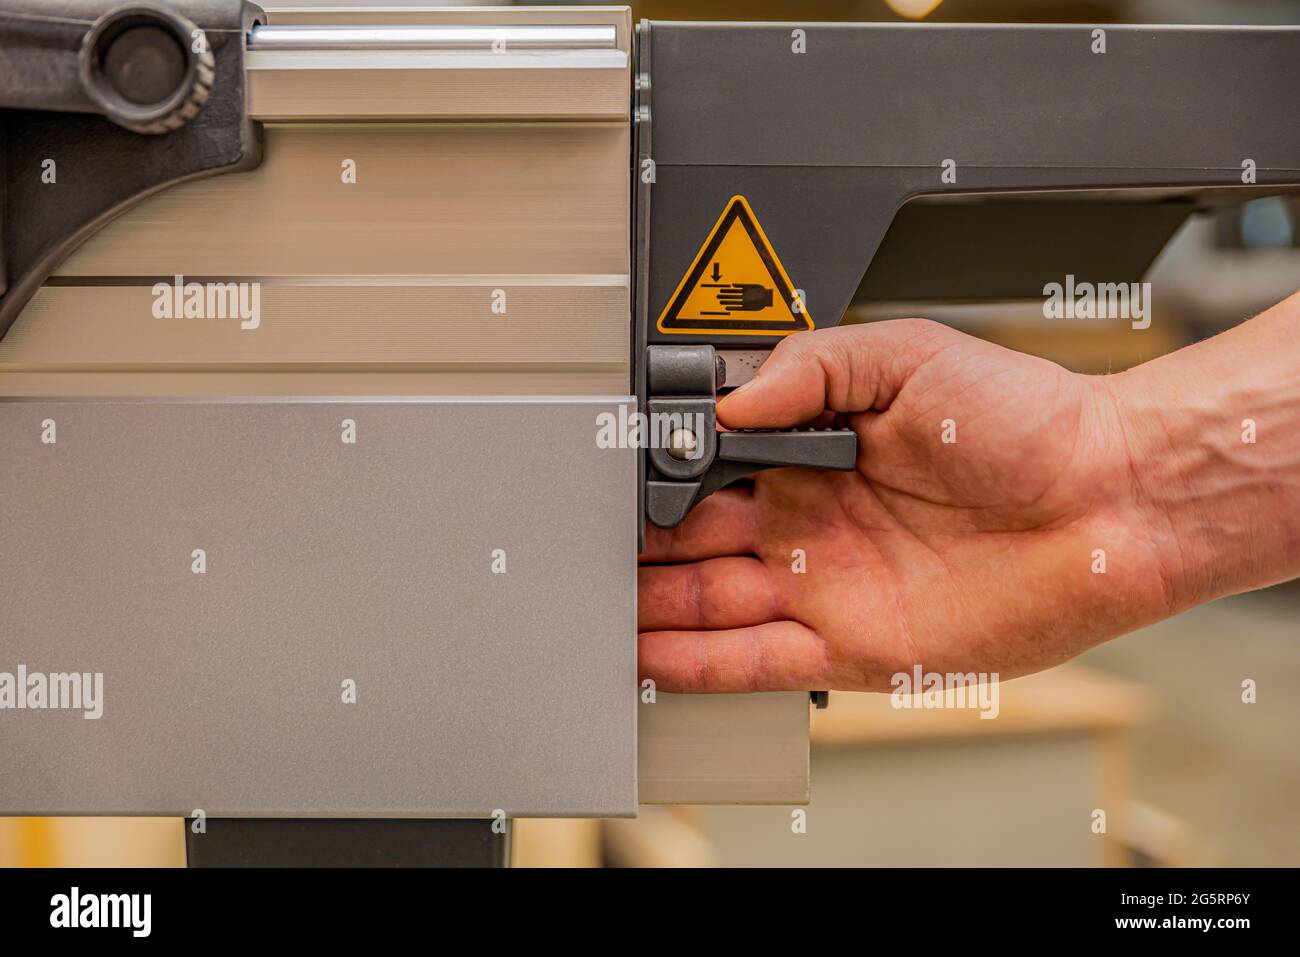 Industrial safety engineering. Compliance with safety rules when using machine tools in production, warning sign, yellow triangle, hand symbol on a Stock Photo